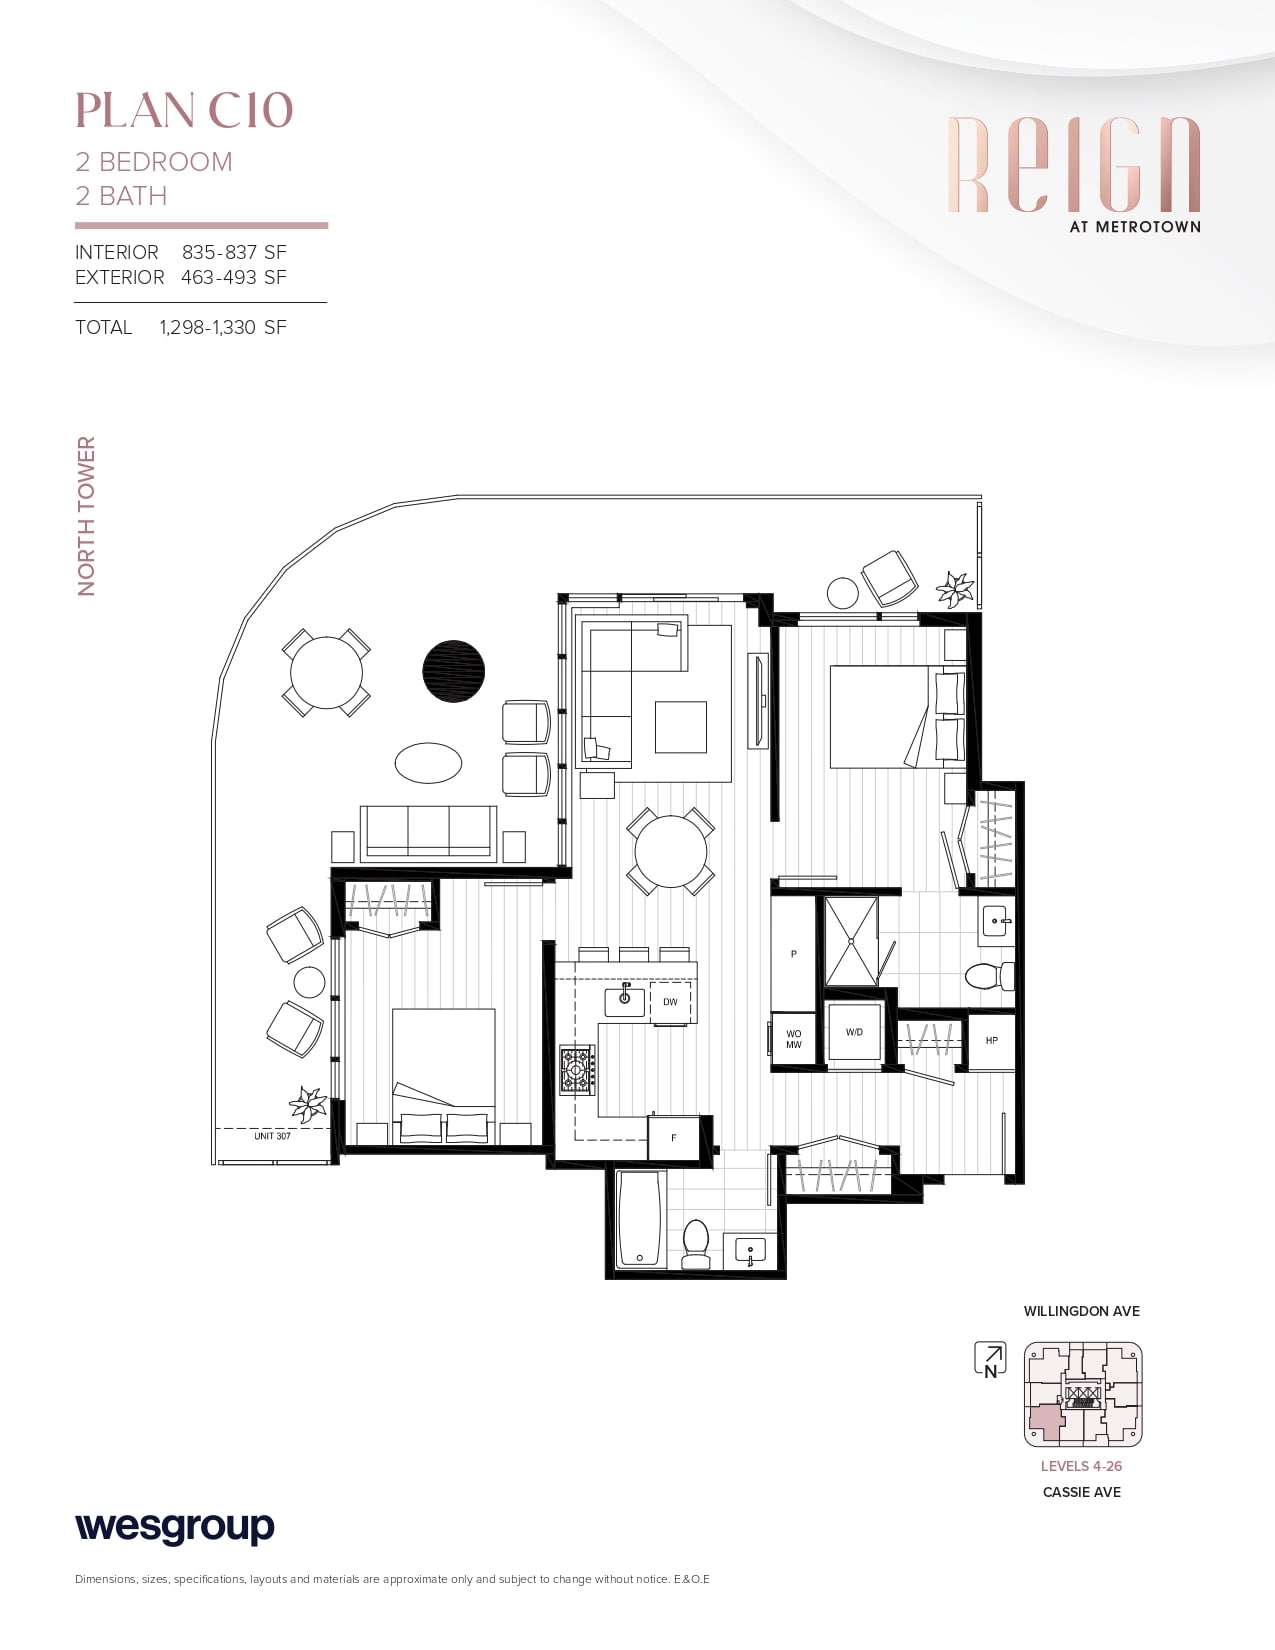 Reign_-_North_Tower_-_Typical_Floorplans_-_FINAL__page-0017-min.jpg